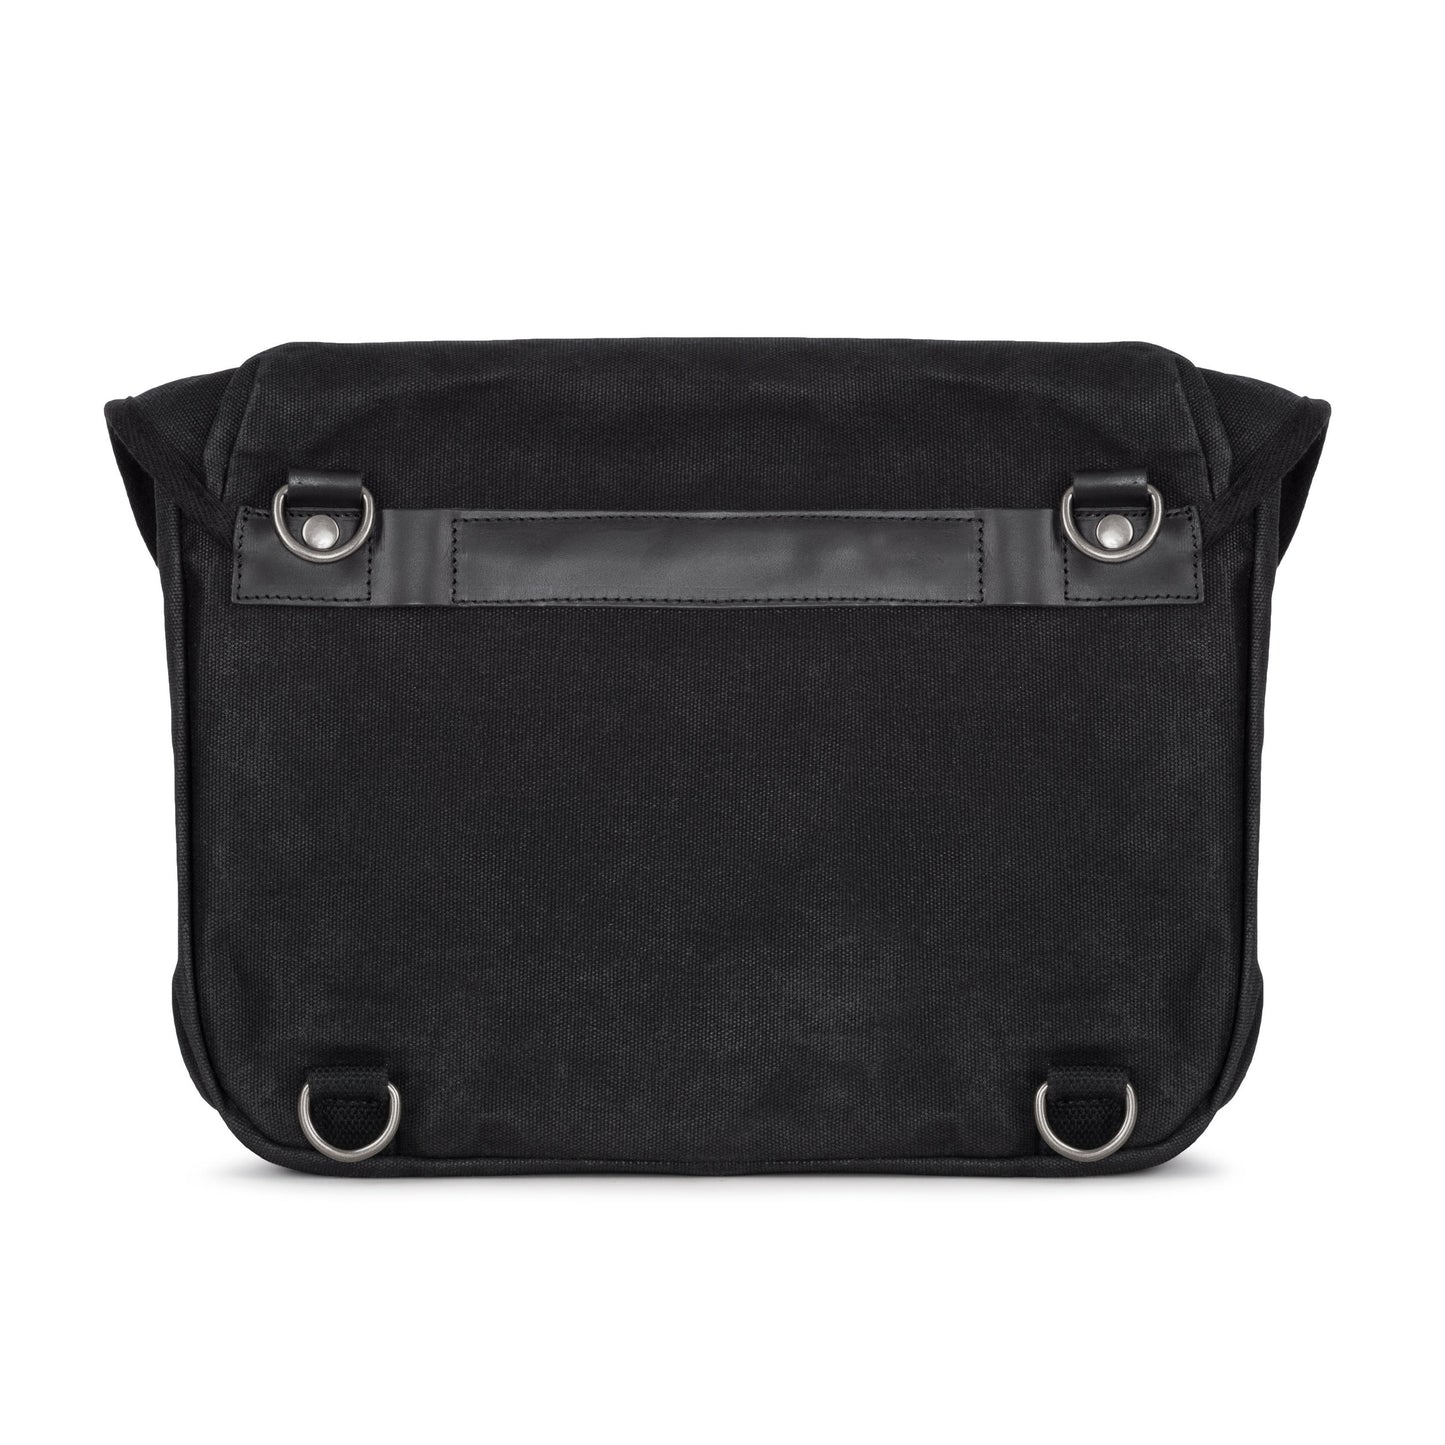 The Day Tripper Motorcycle Pannier Bag - Black